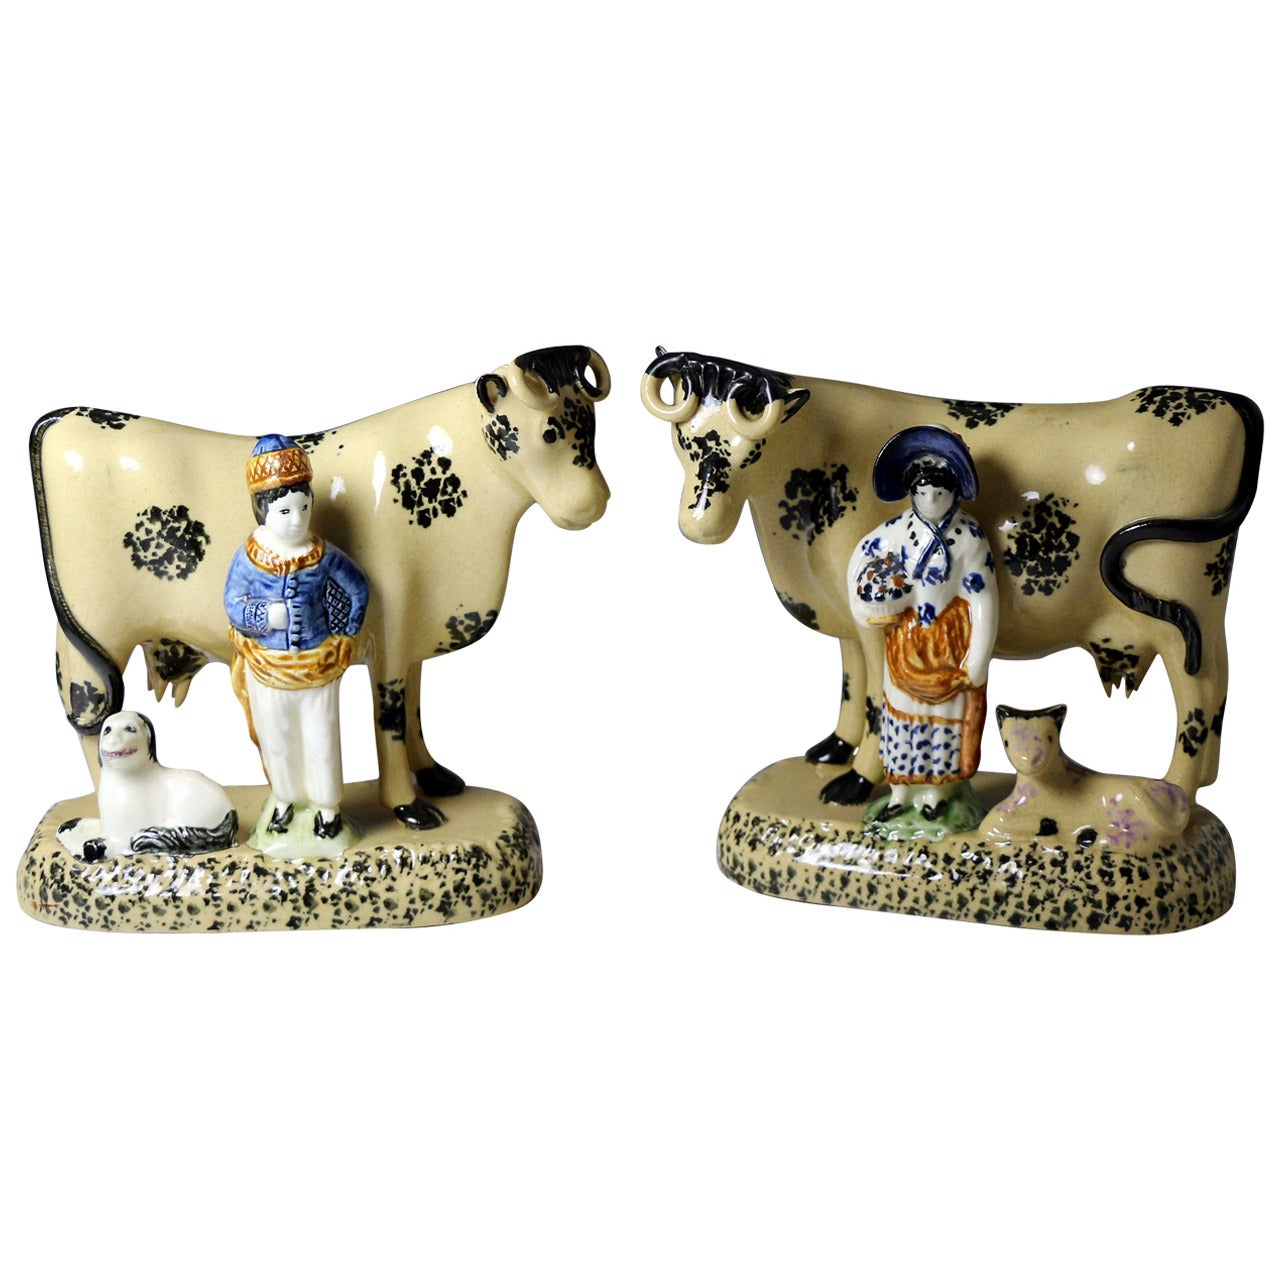 Yorkshire Pottery Prattware Figures of Cows with Attendents